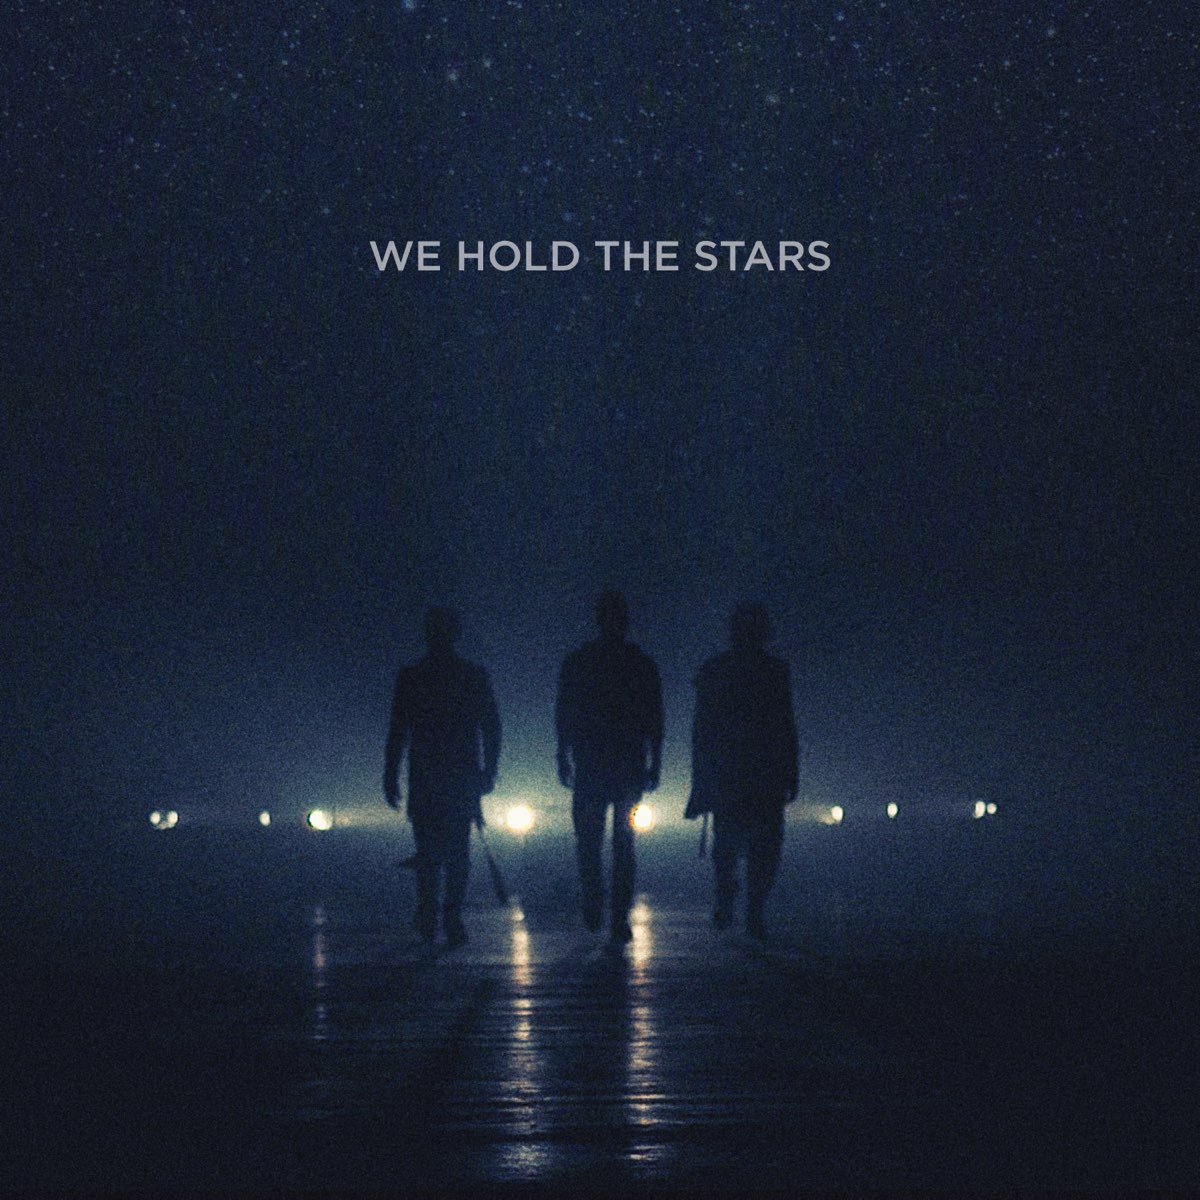 We Hold the Stars - Single by Carpark North on Apple Music